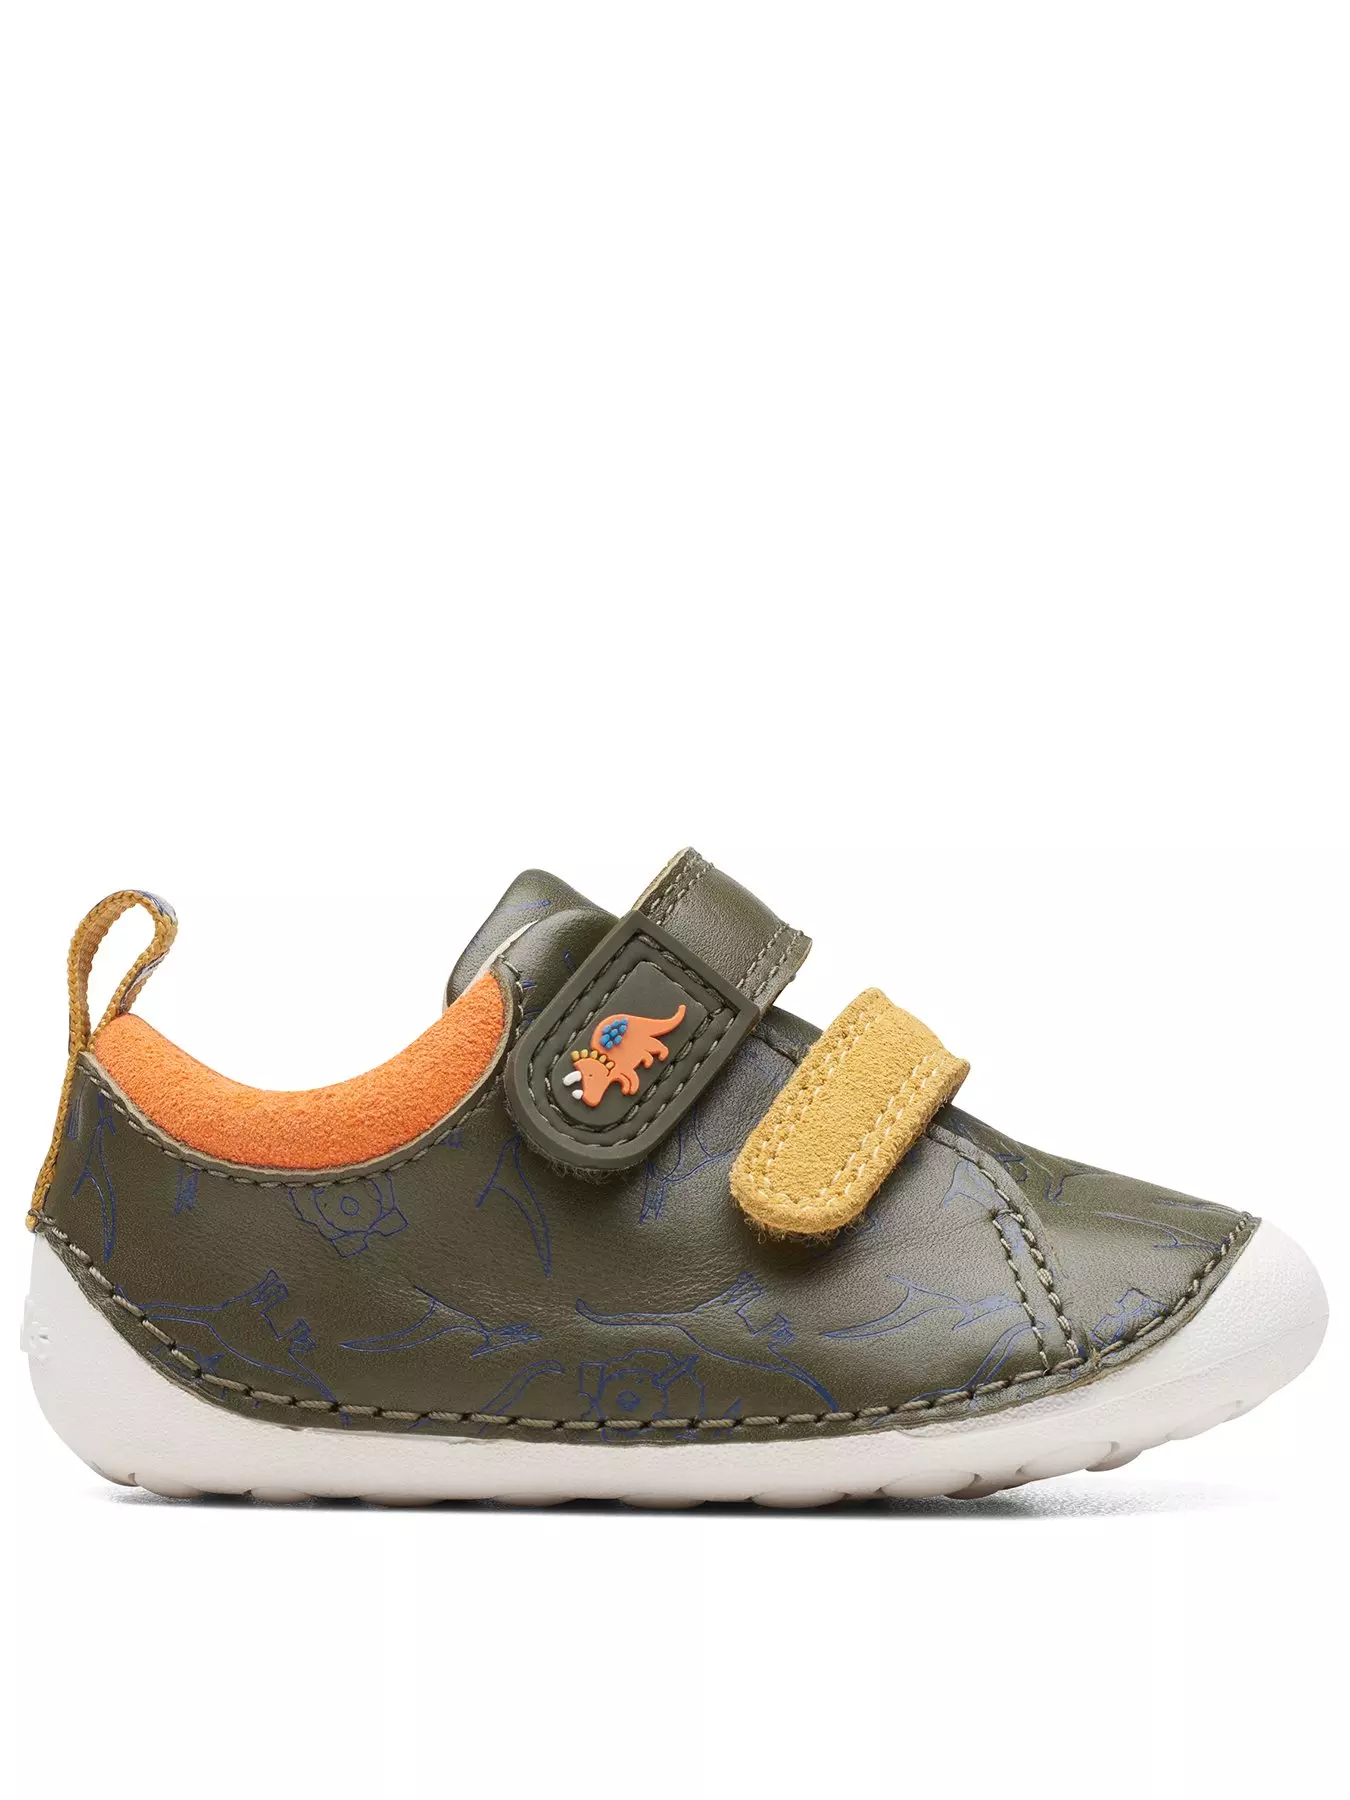 Clarks Kids Shoes | Very